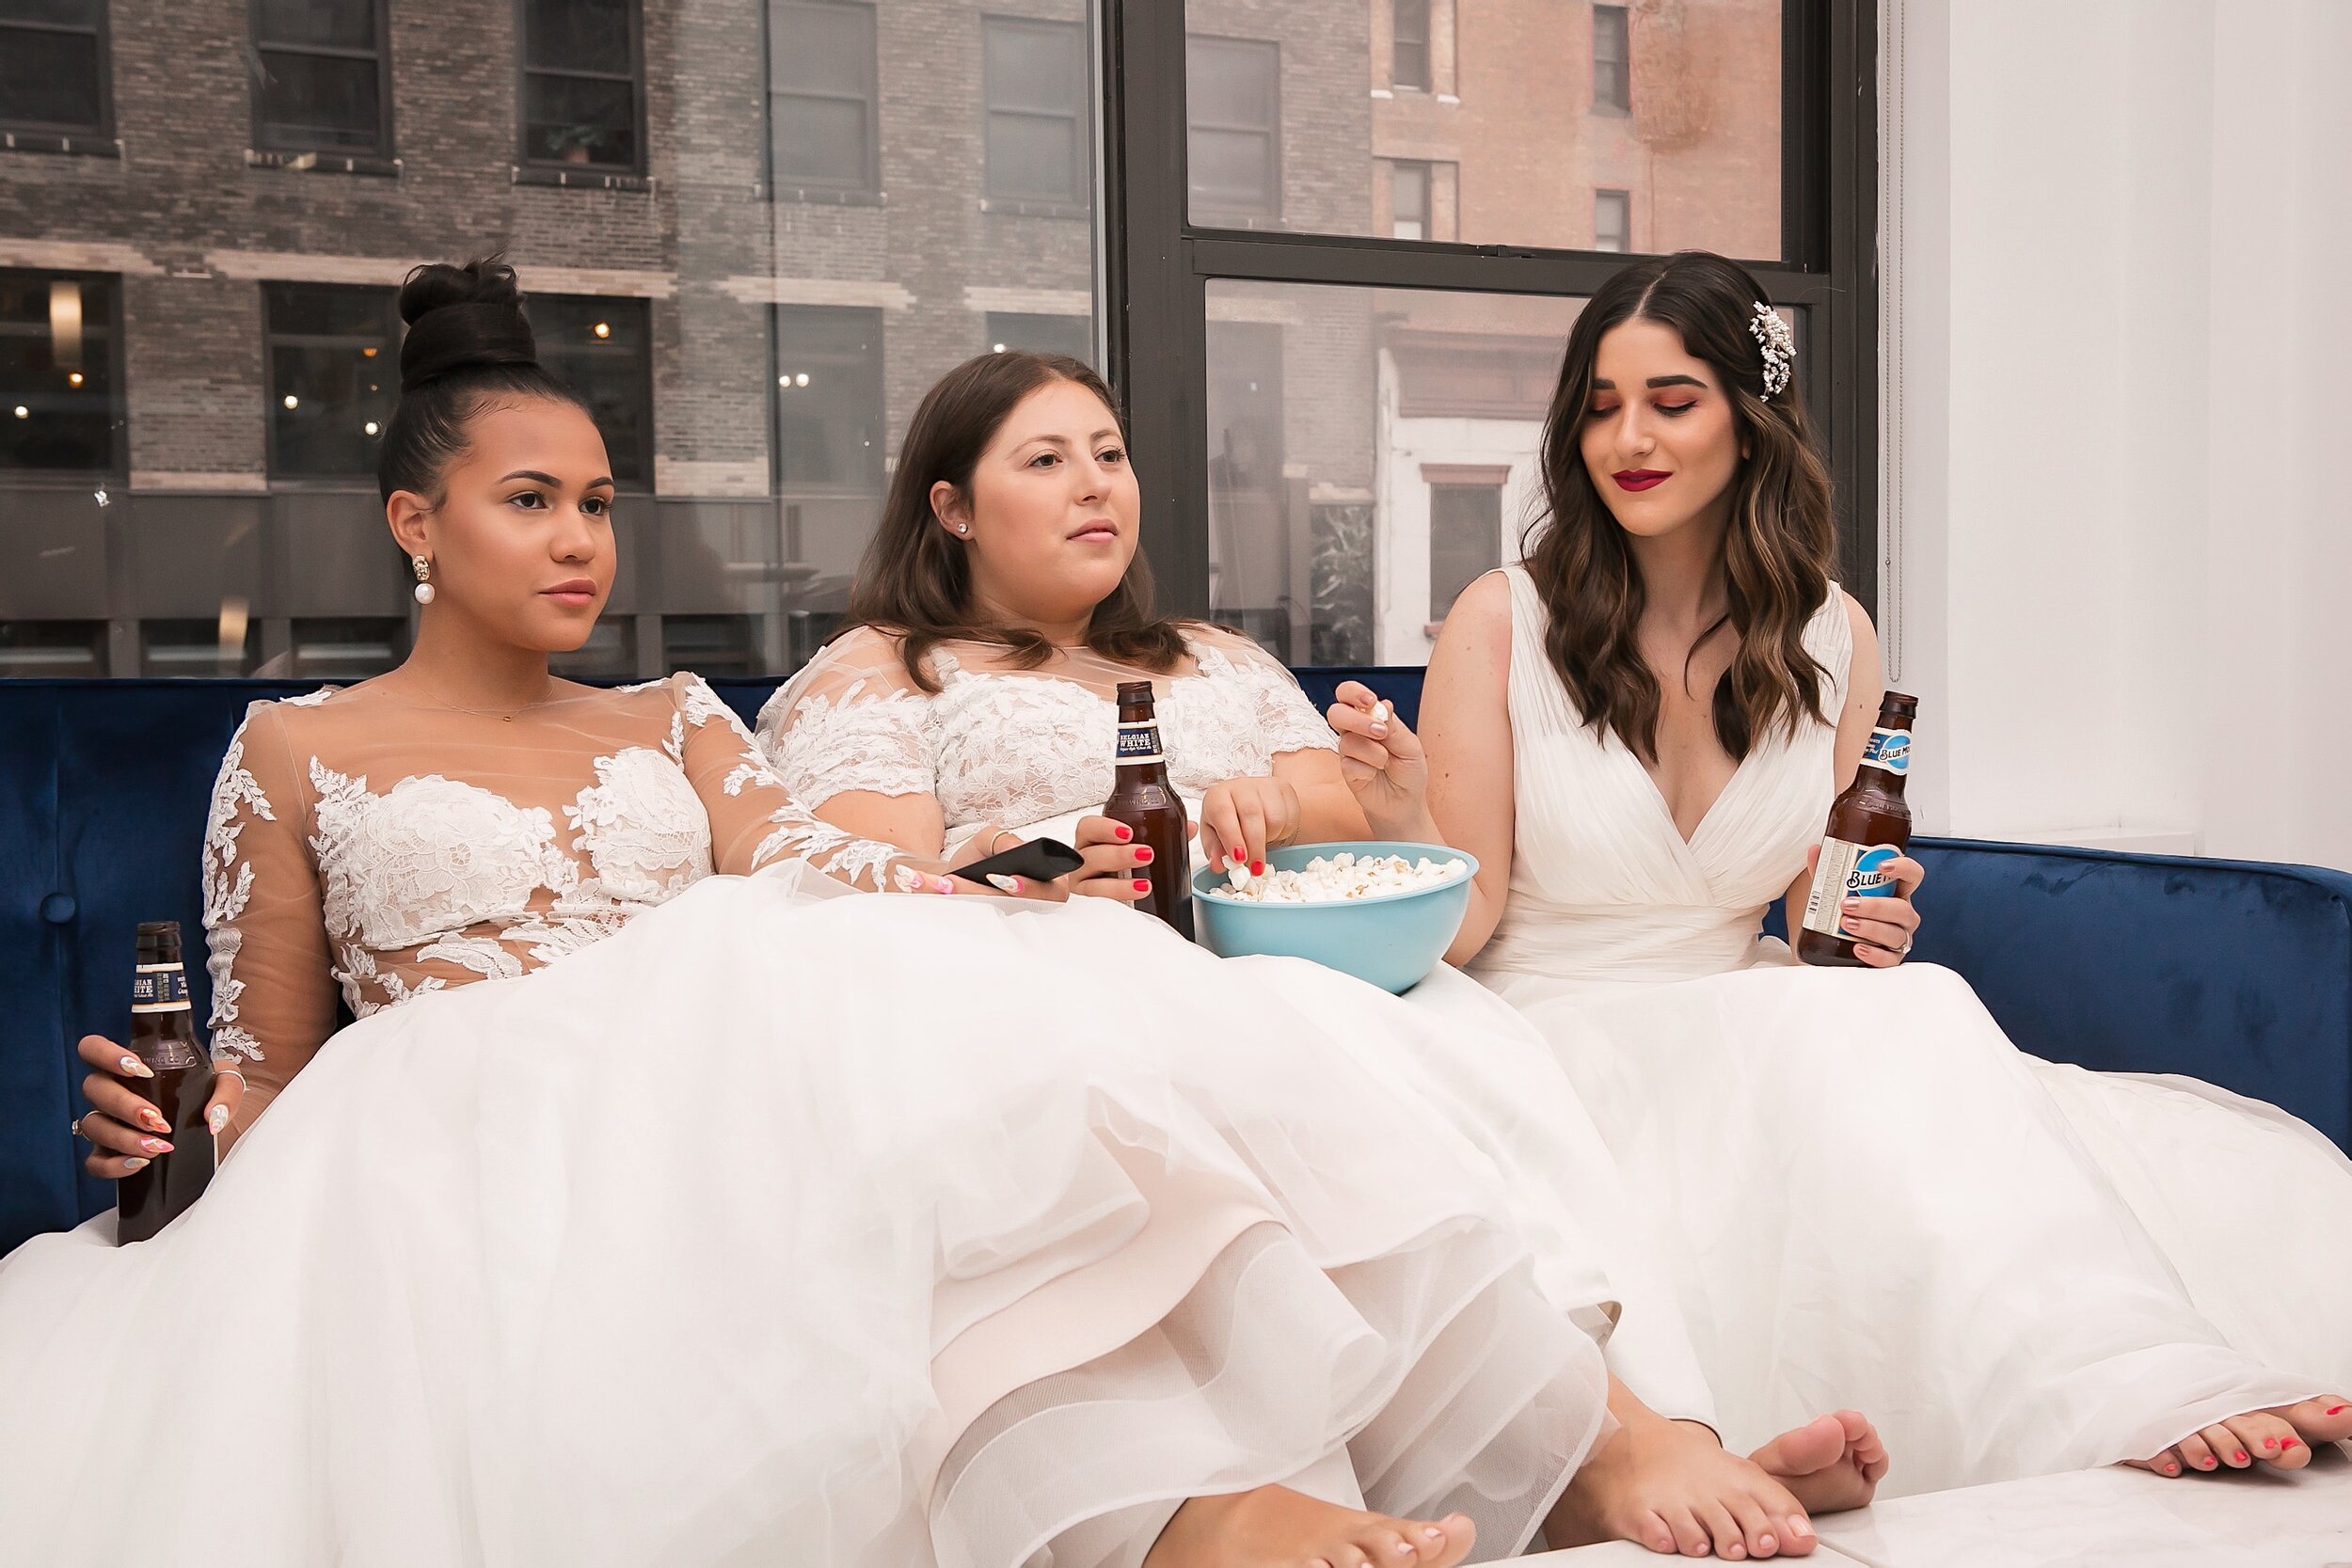 Recreating A Scene From Friends How To Plan A Group Photoshoot Esther Santer NYC Blogging Photoshoot Wedding Dresses Gowns White Rachel Monica Phoebe Popcorn Coffee Movie Night Funny Cosplay Bridal Hair Pretty Beautiful  Girls Women Beer Style Trend.JPG